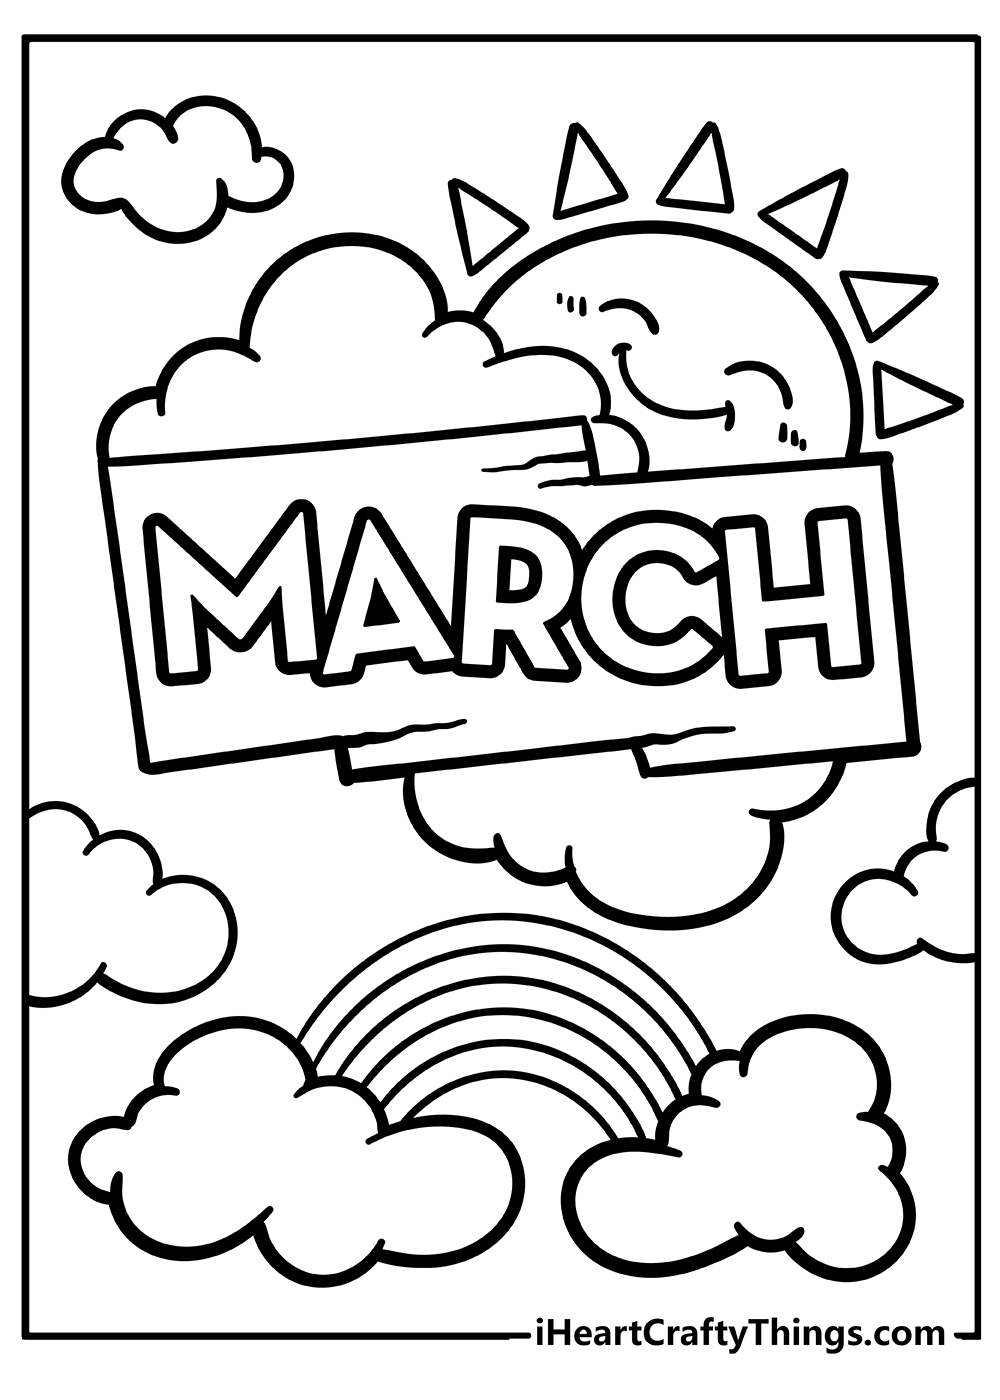 March coloring pages free printables